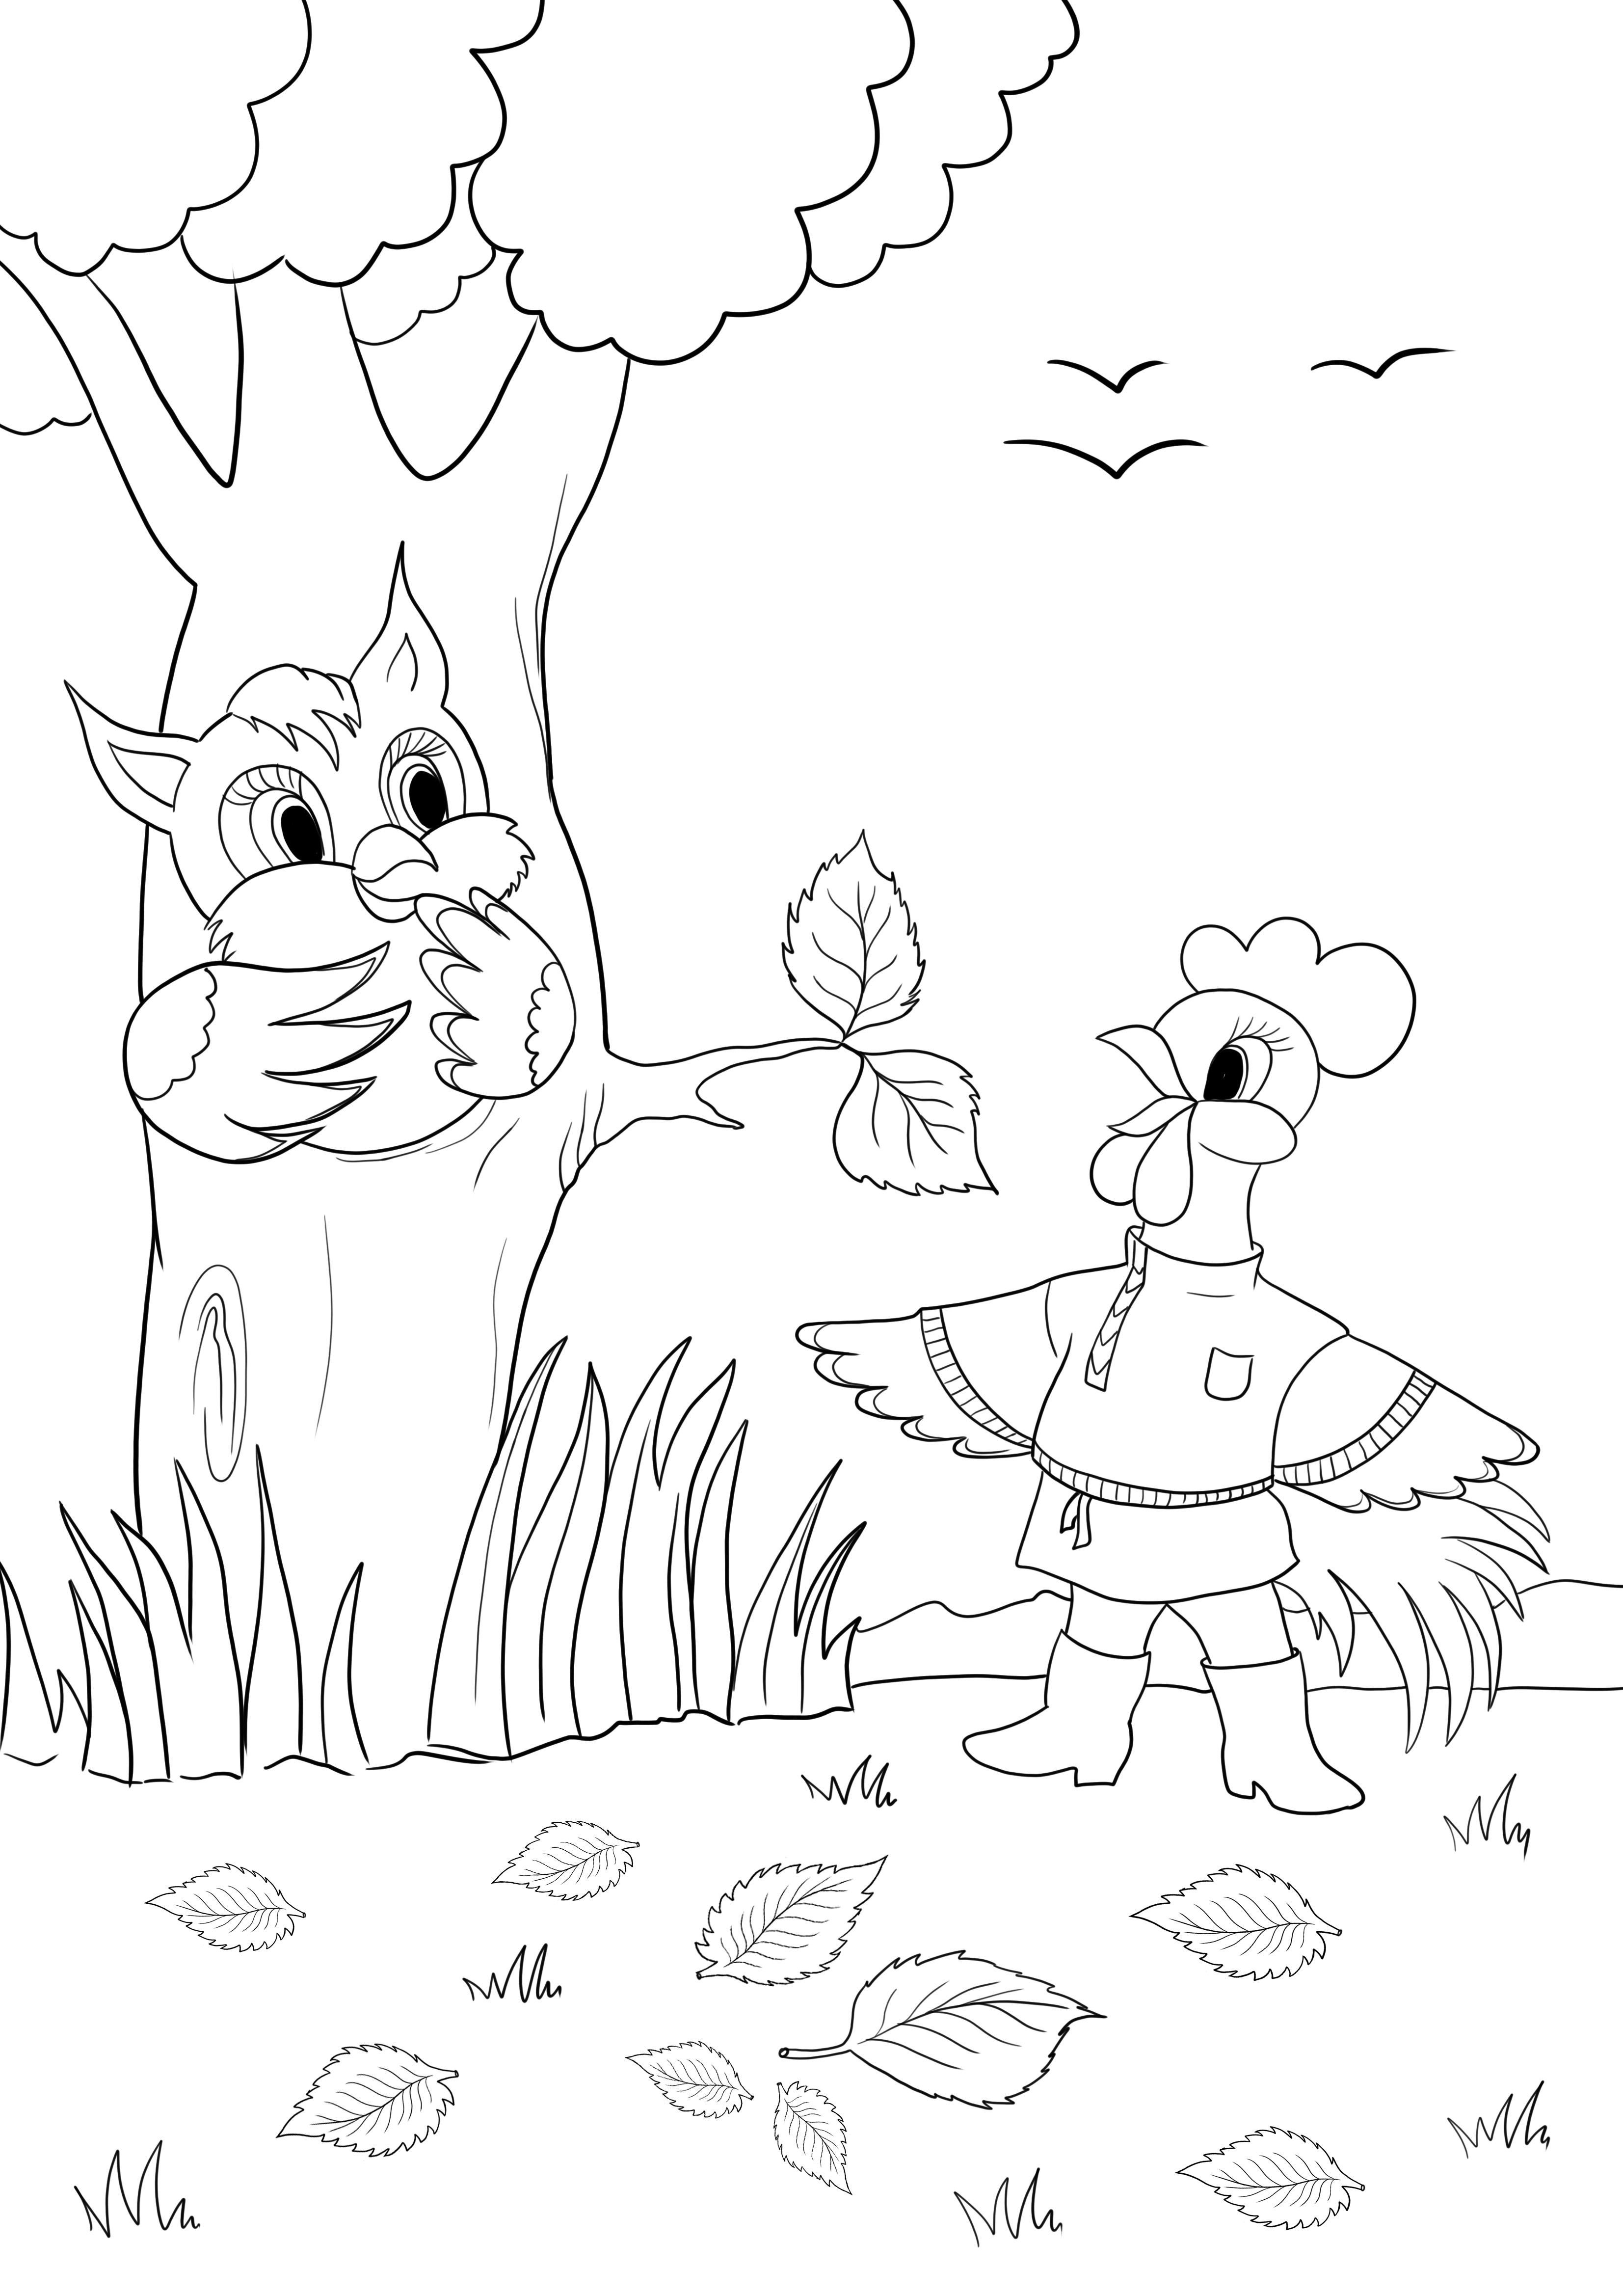 Singing owl and rooster in the forest downloading and coloring for free